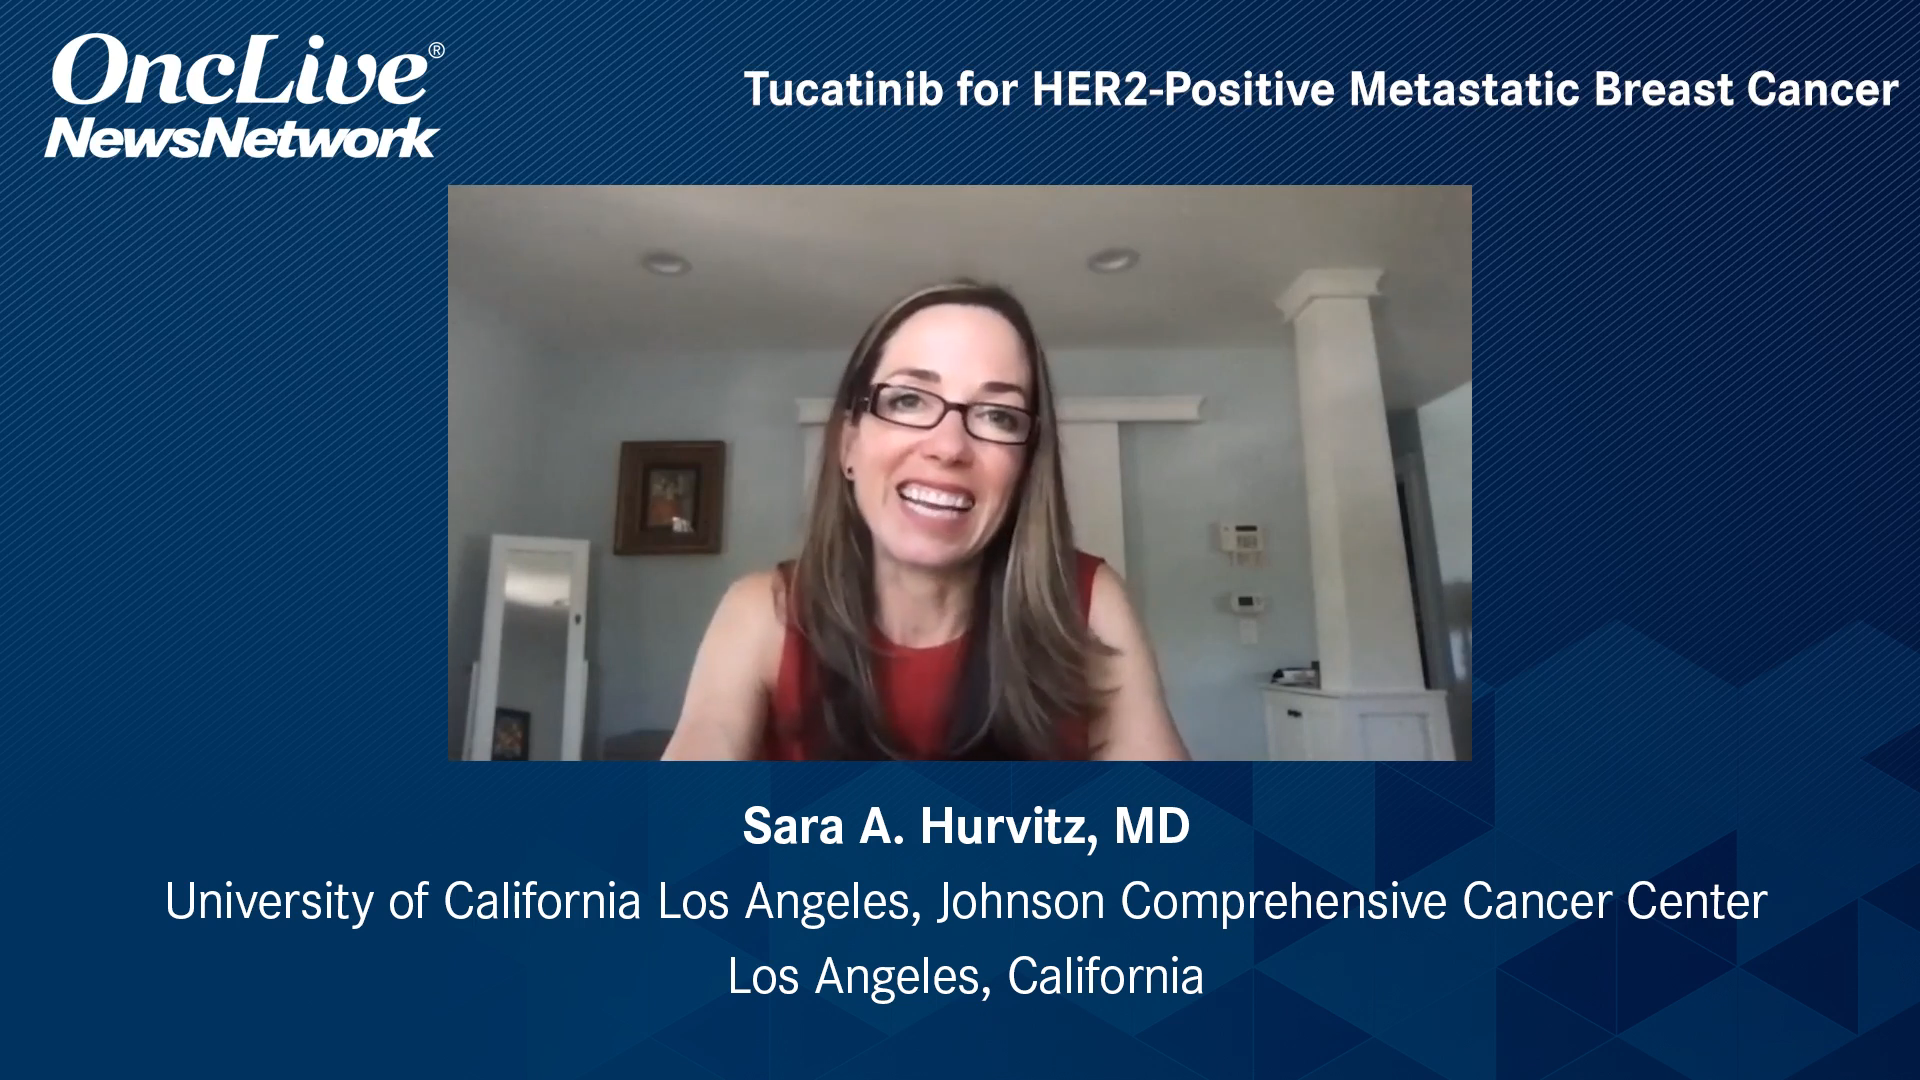 Tucatinib for HER2-Positive Metastatic Breast Cancer